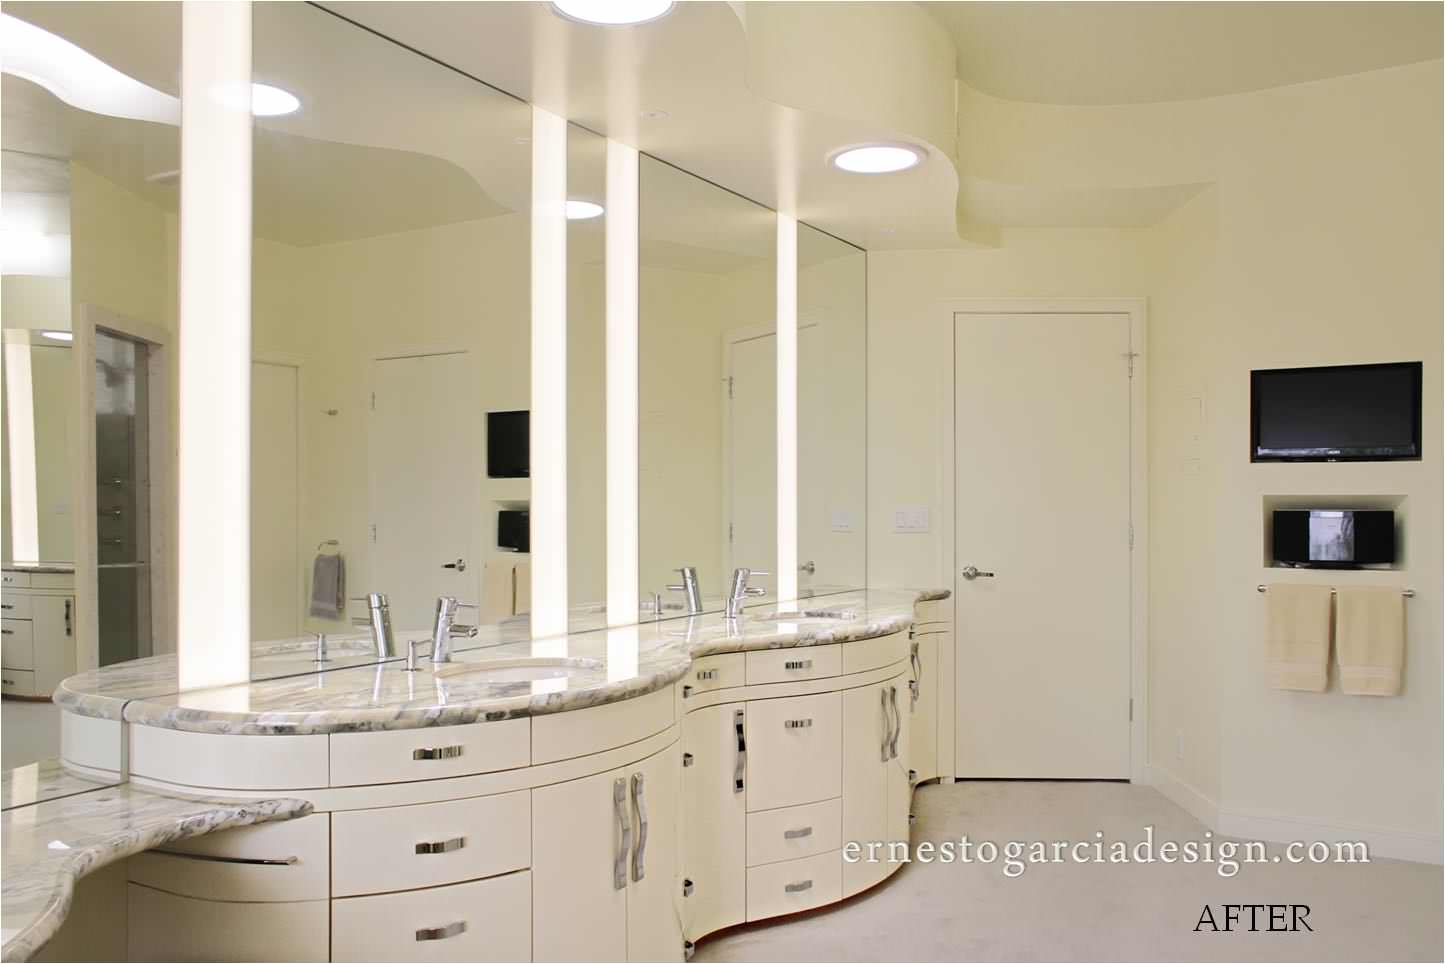 * 2012 SECOND PLACE WINNER - BATHROOM CATEGORY * ASID